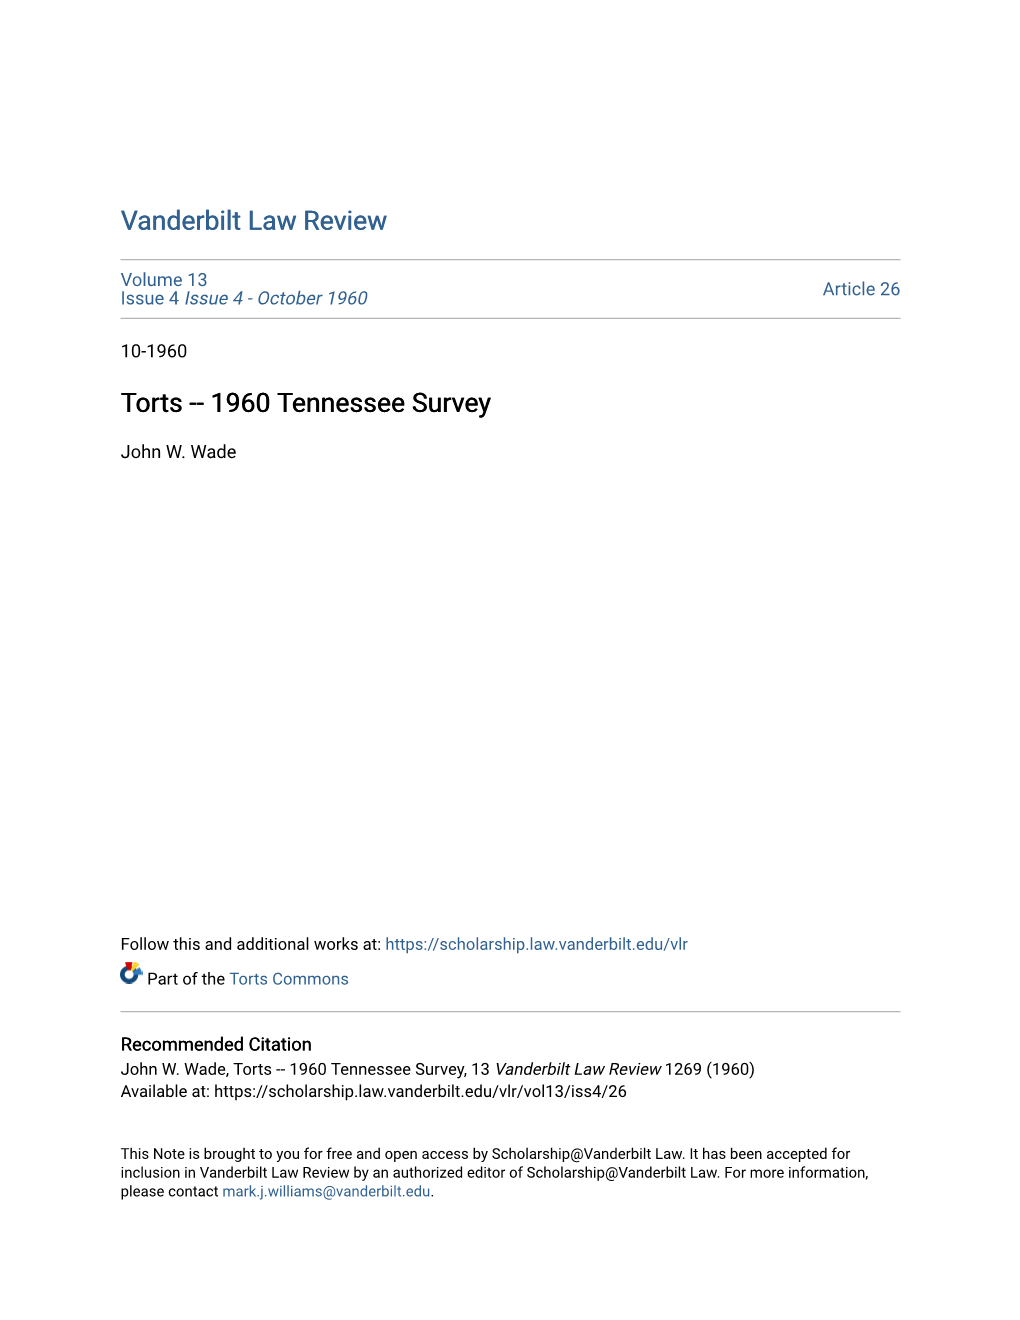 Torts -- 1960 Tennessee Survey